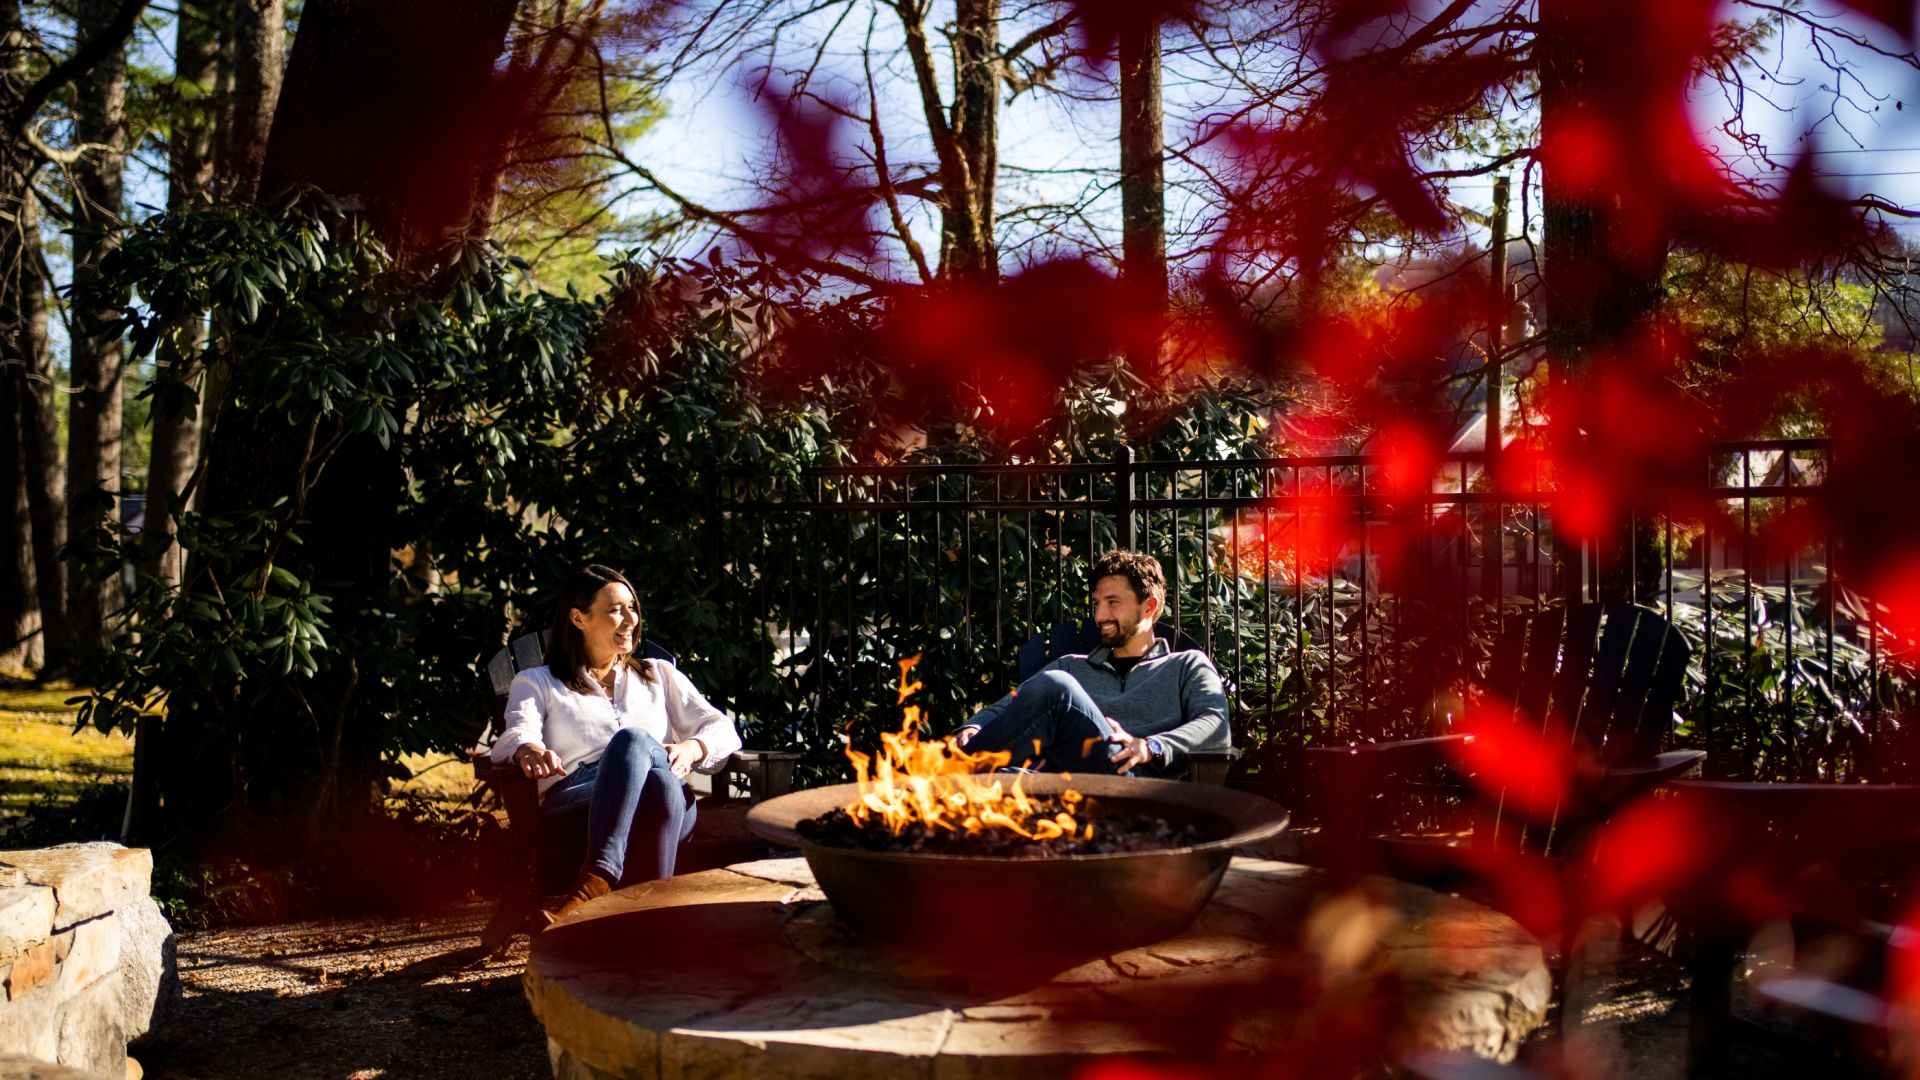 A Man And Woman Sitting At A Table With A Fire In A Fire Pit